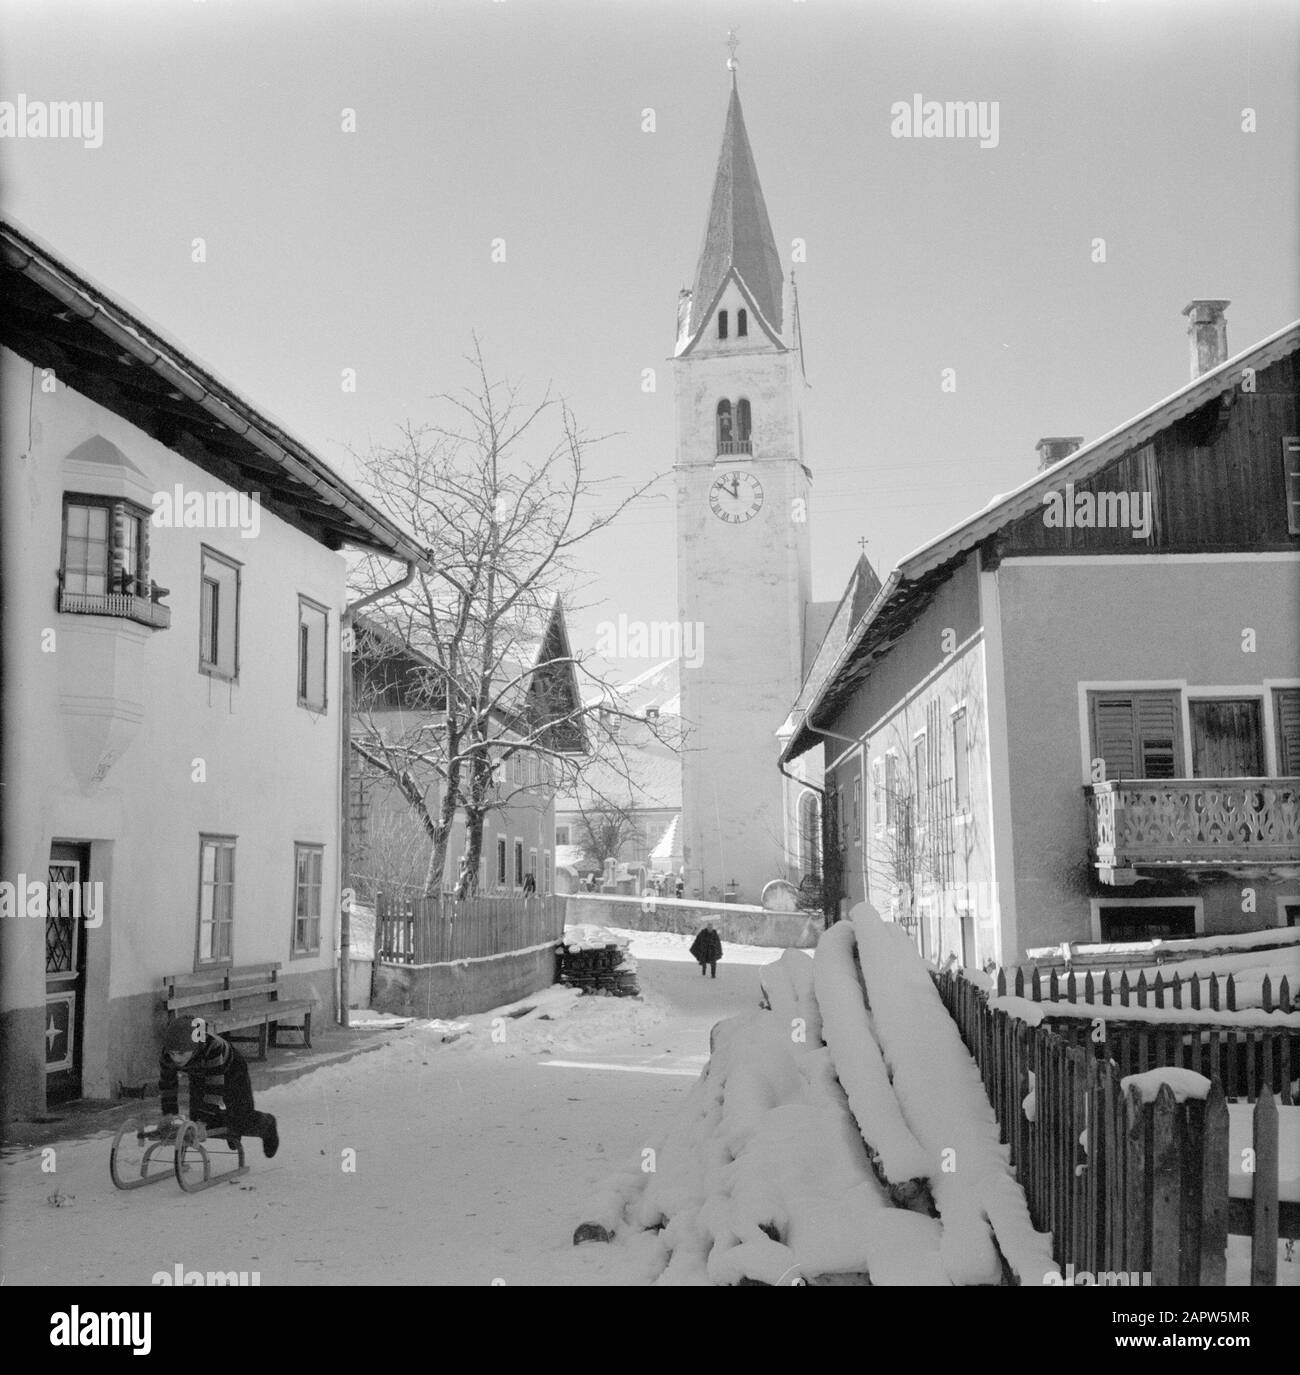 Winter in Tyrol  Child with sleigh in the snow in Sistrans Date: January 1960 Location: Austria, Sistrans, Tyrol Keywords: village statues, church buildings, sleds, snow, holidays, winter sports, winter sports, etc. housing Stock Photo